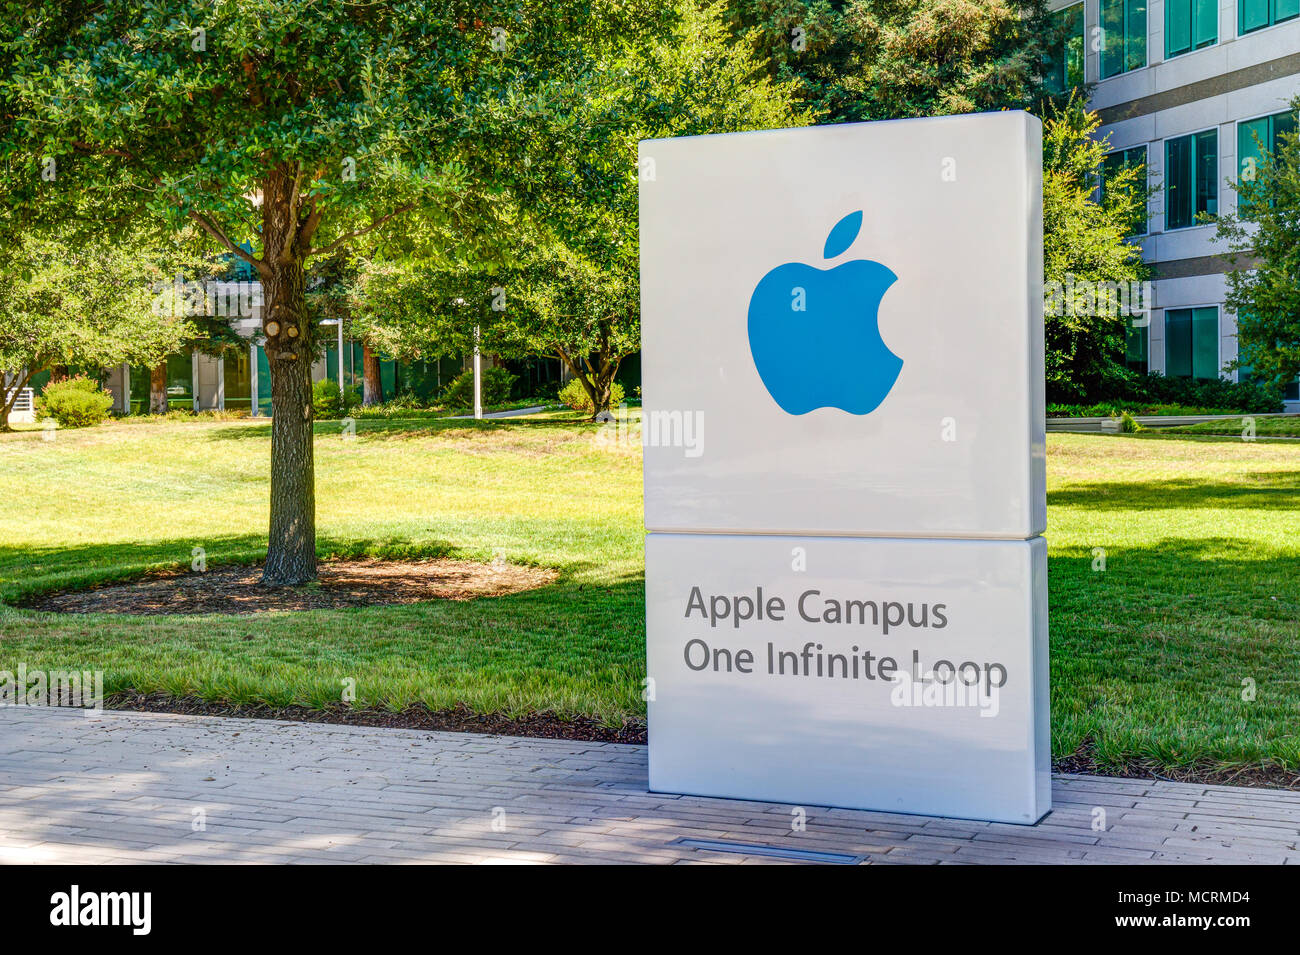 CUPERTINO, CA/USA - JULY 29, 2017: Apple Computer headquarters exterior and logo. Apple Inc. is an American multinational technology company. Stock Photo